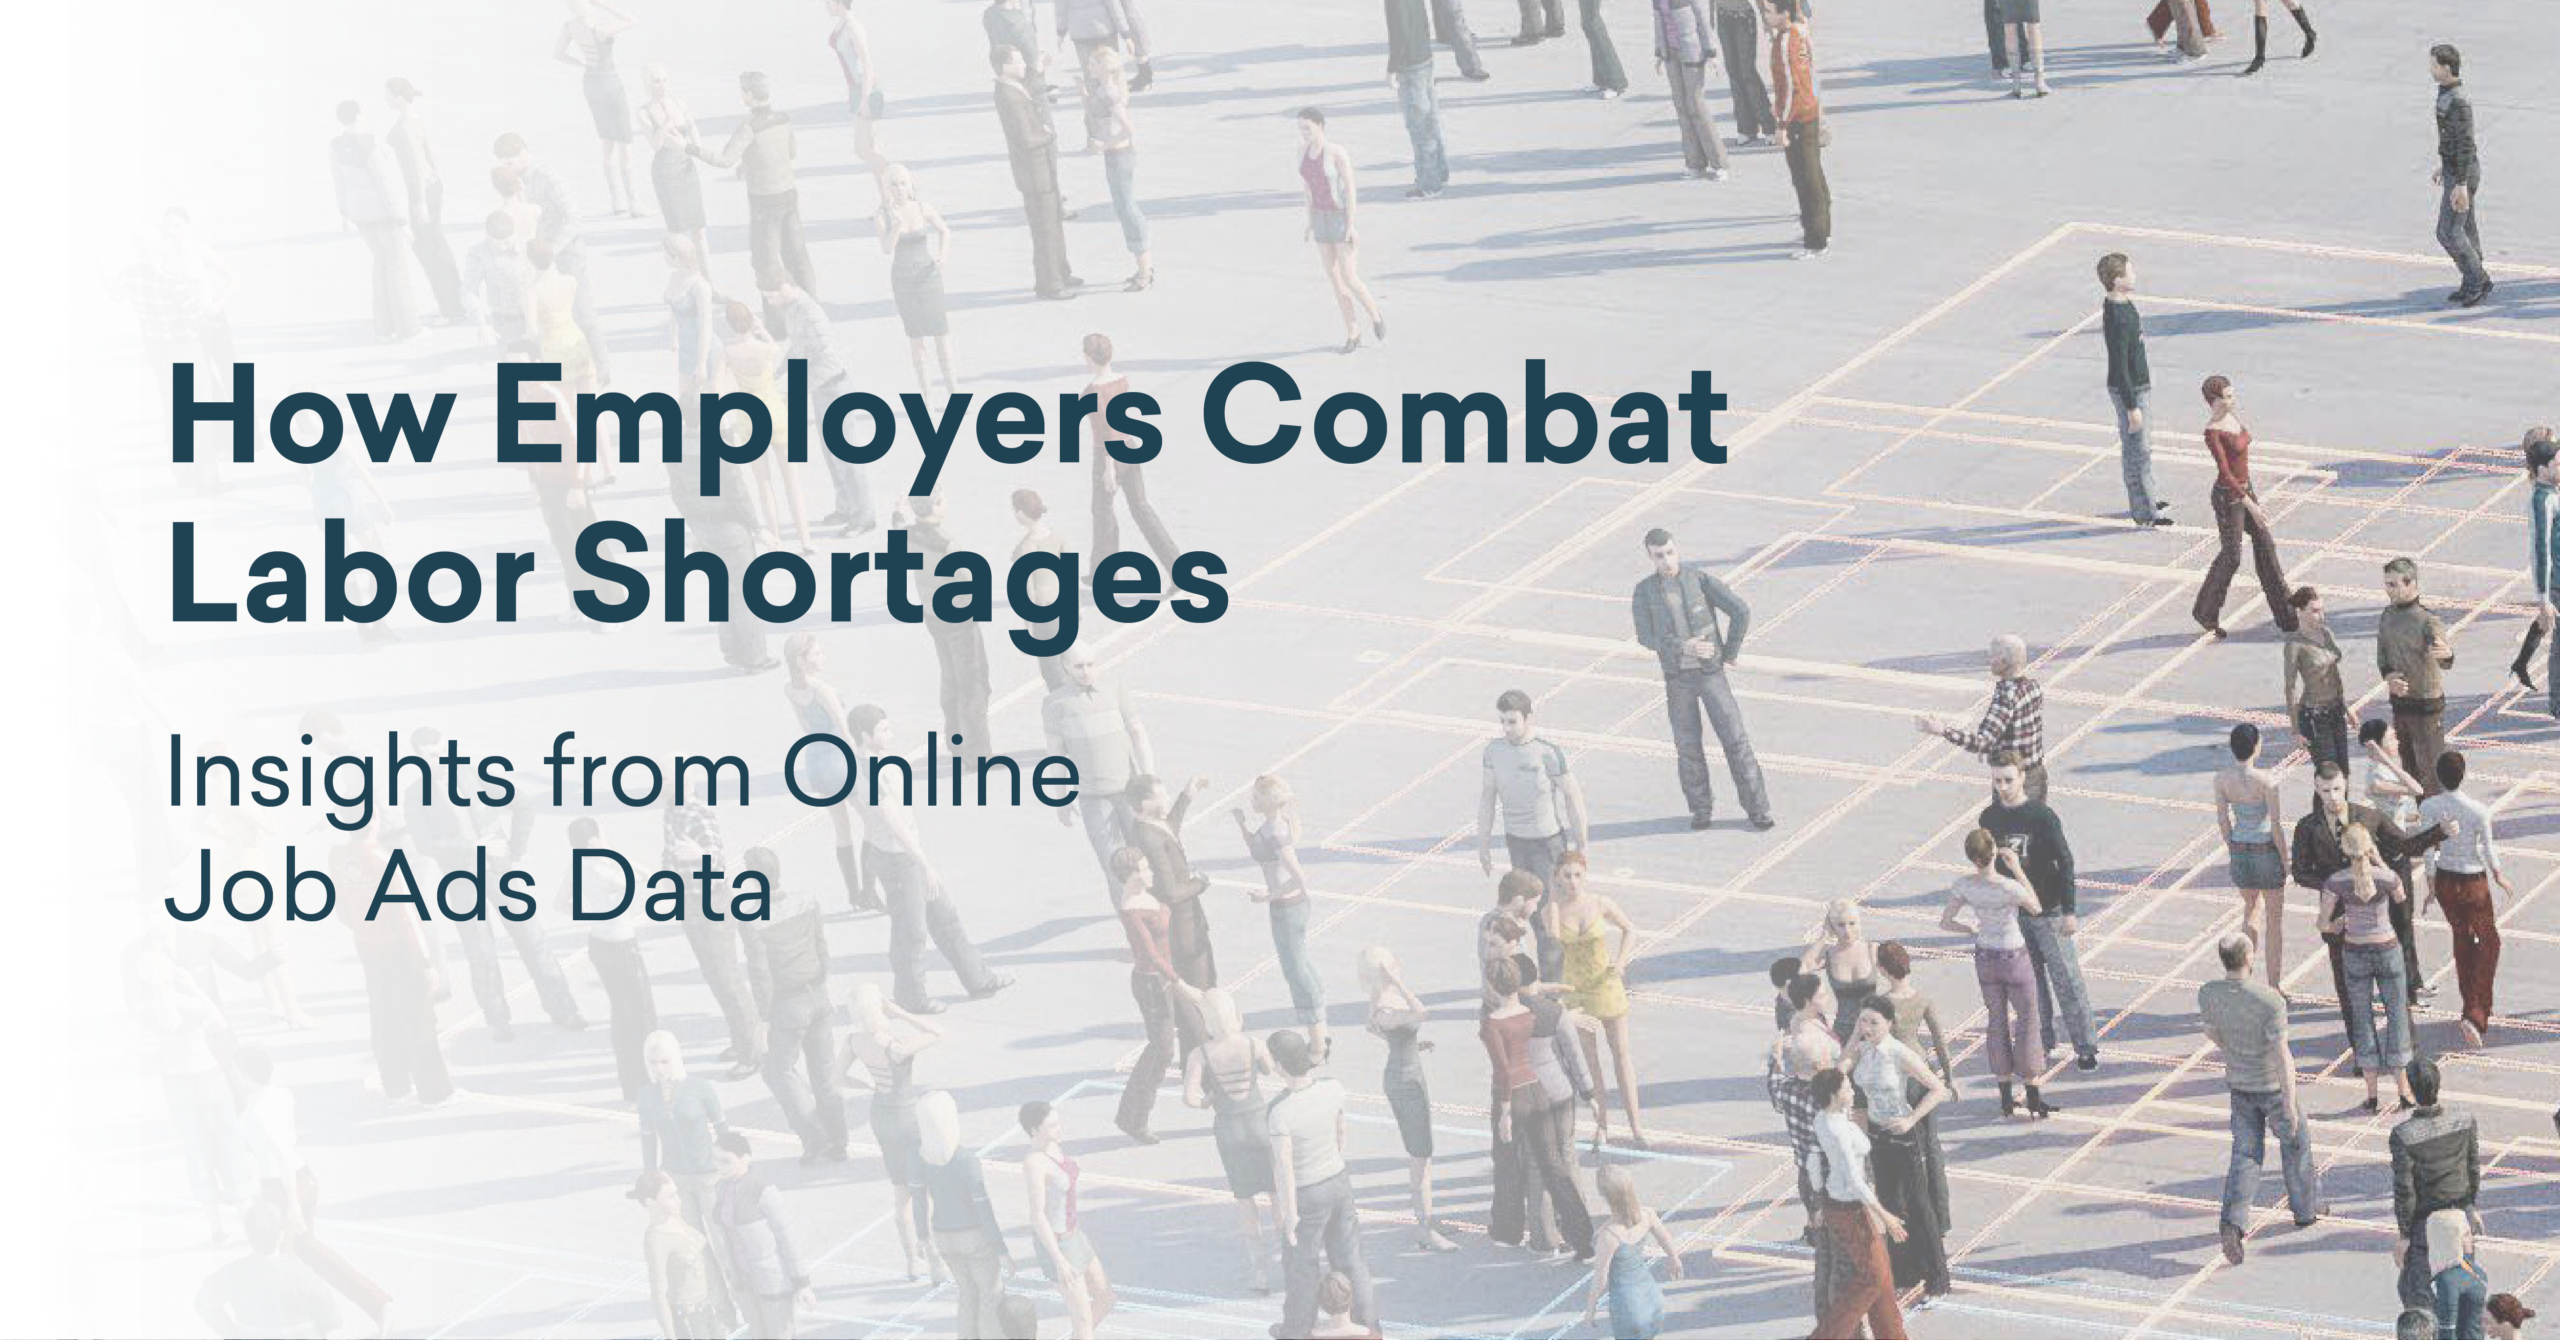 How Employers are Combatting Labor Shortages